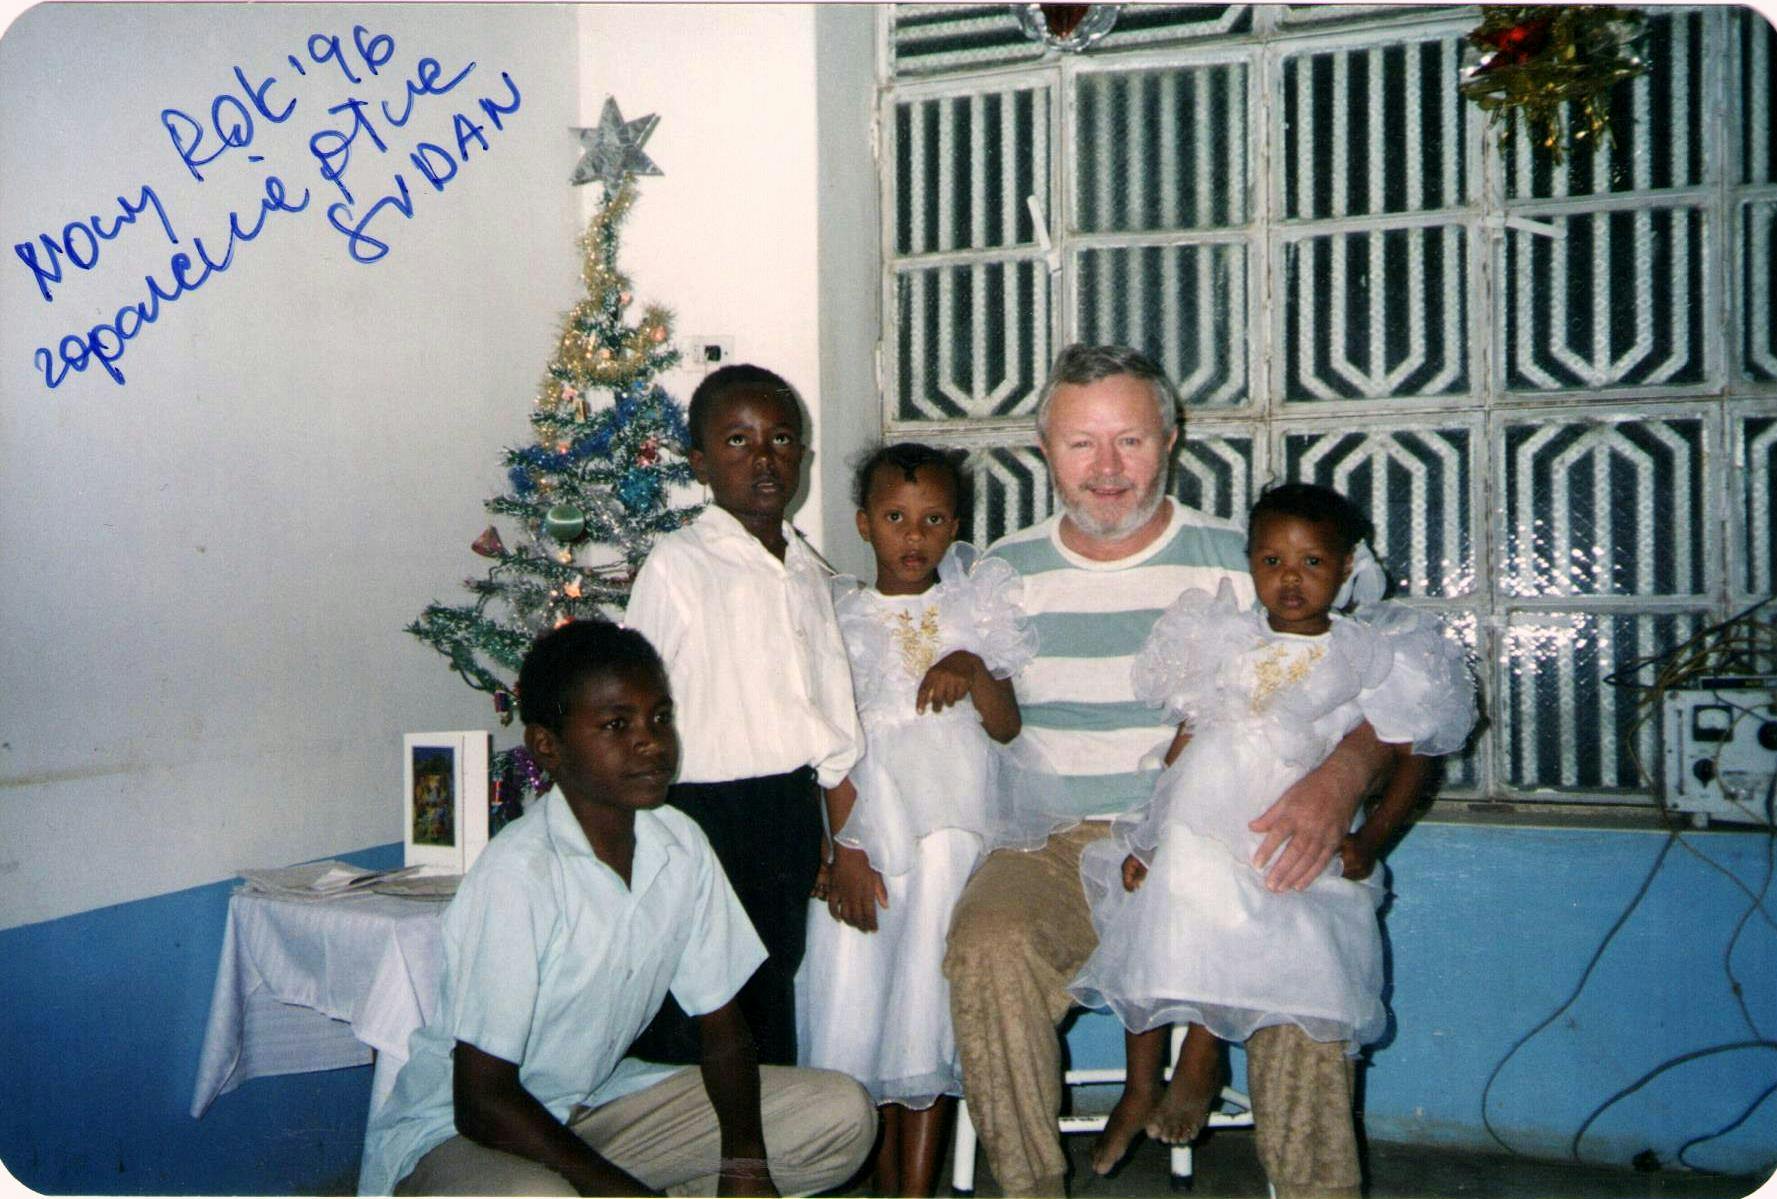 Sudan, 1990s. Zbigniew Kowalski among Sudanese children. In the background, a Christmas tree.